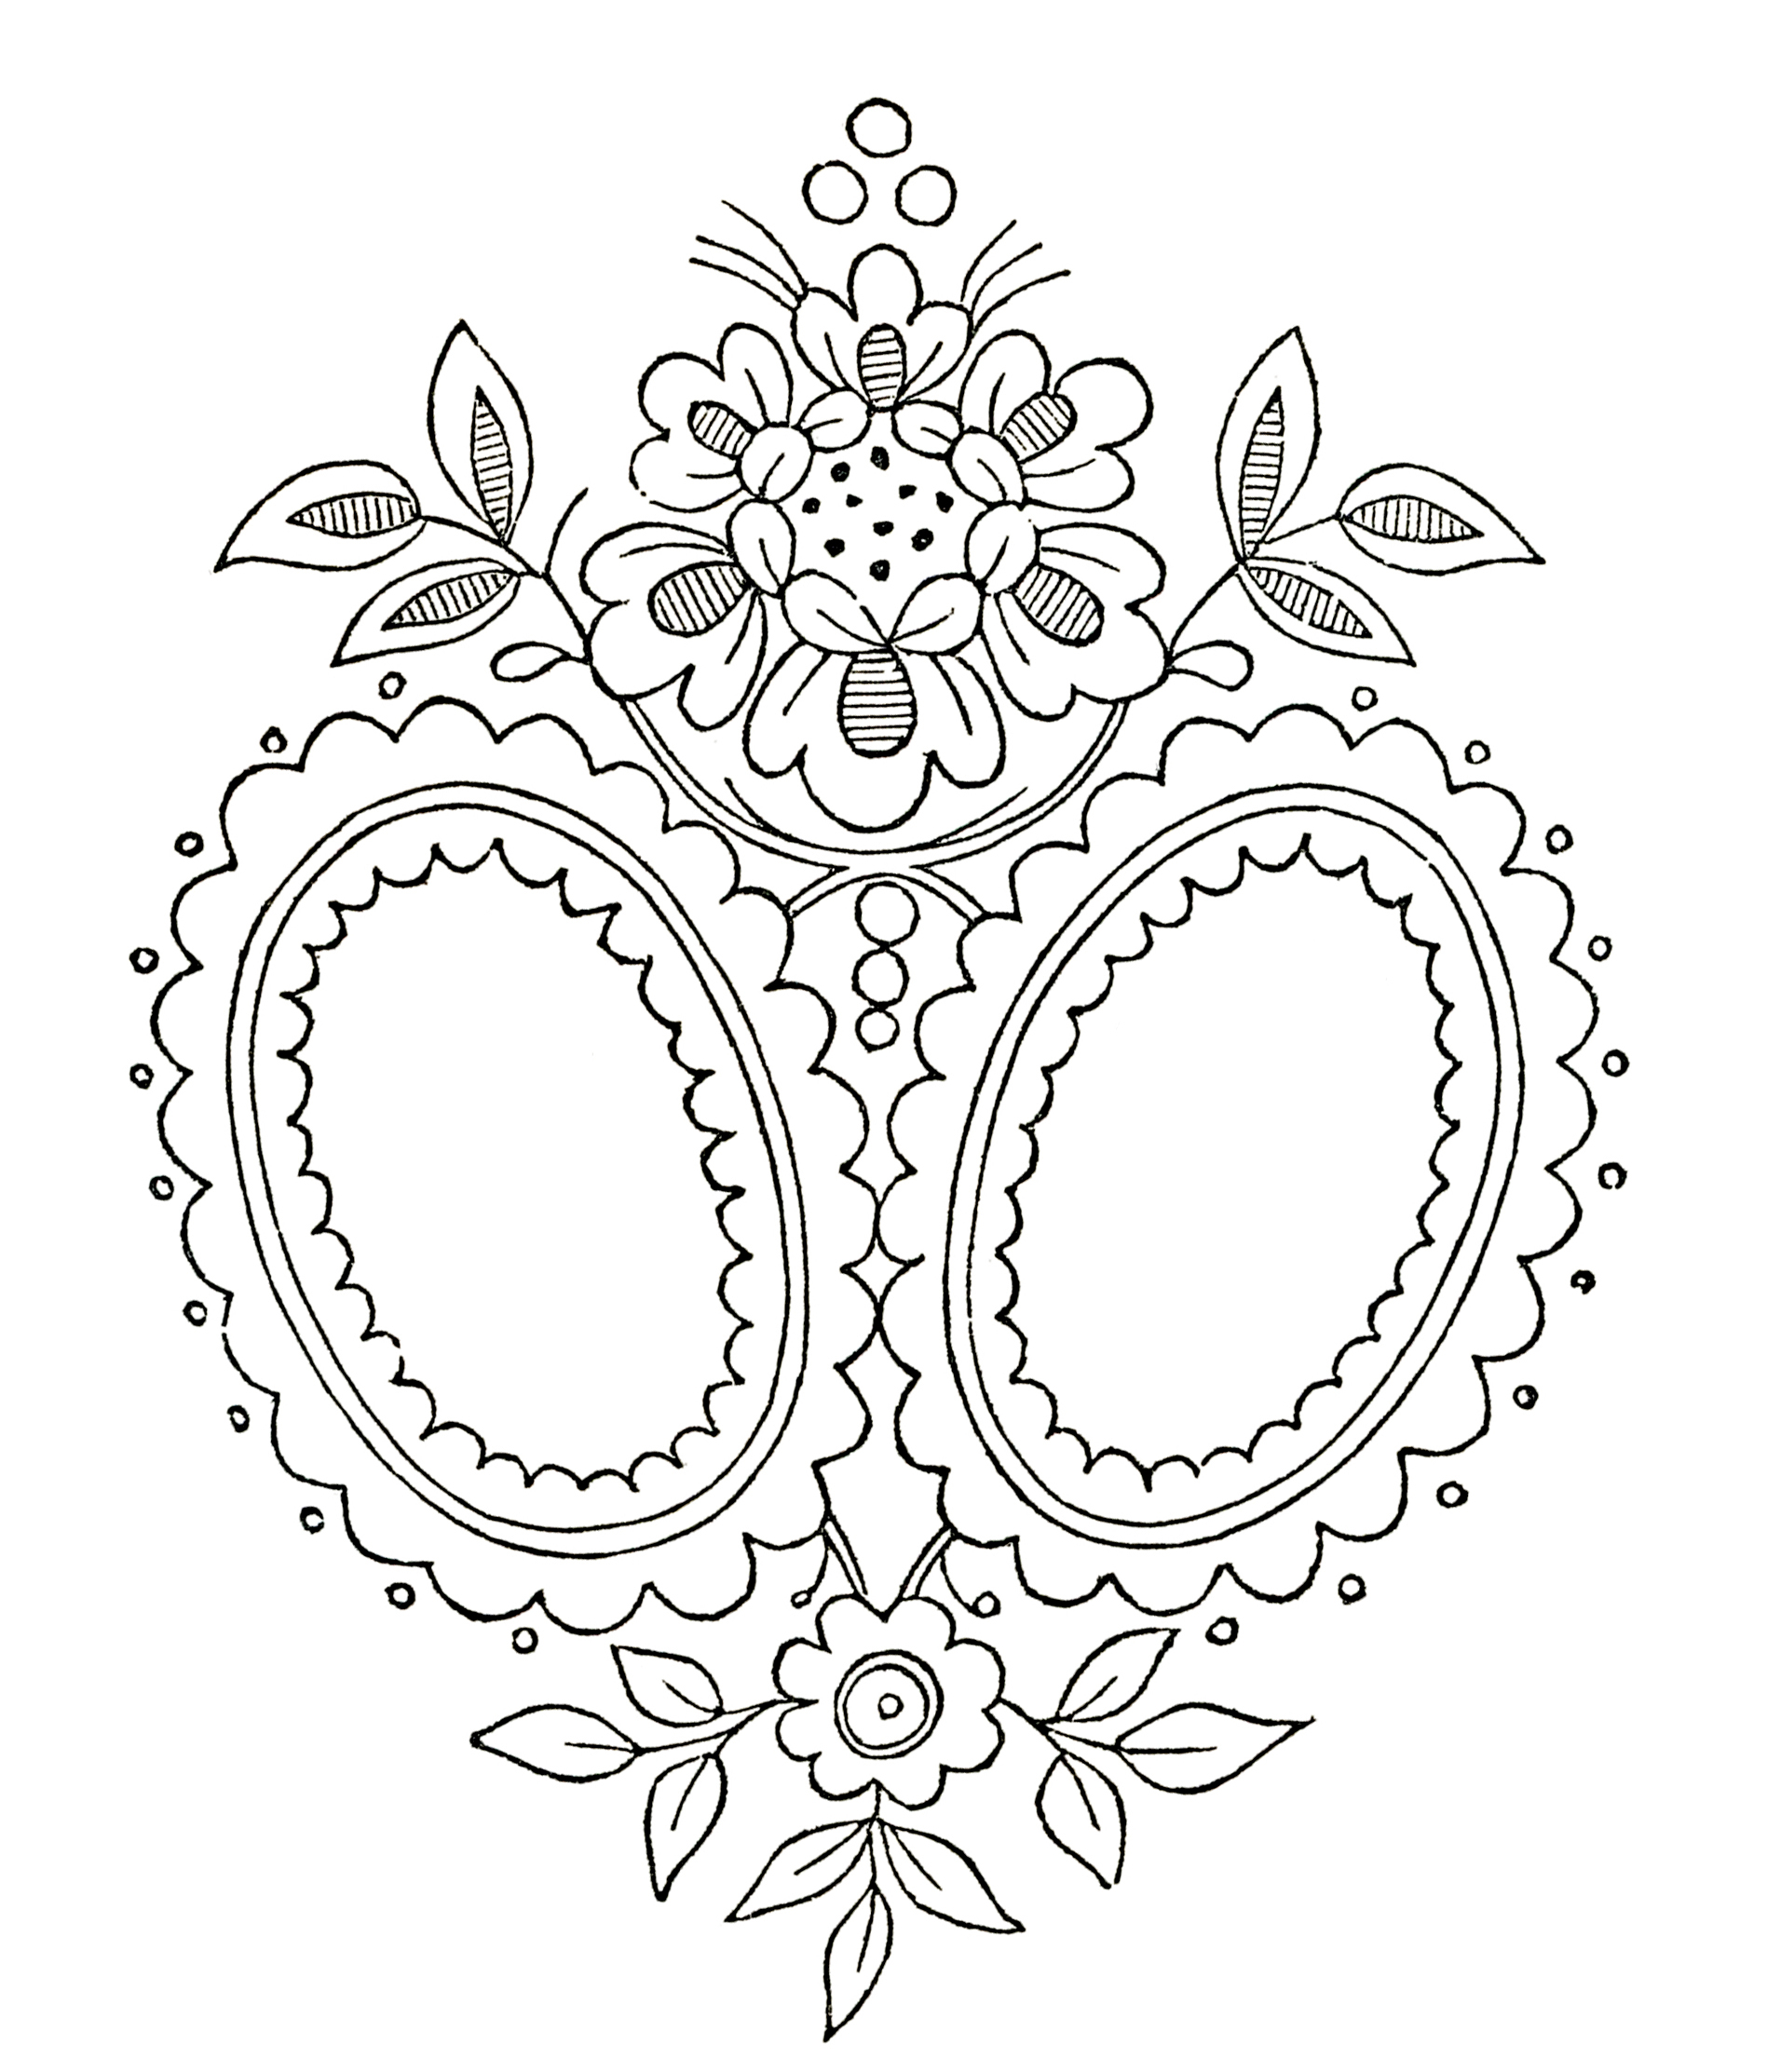 Hand Embroidery Monogram Patterns Vintage Monogram Embroidery Pattern The Graphics Fairy